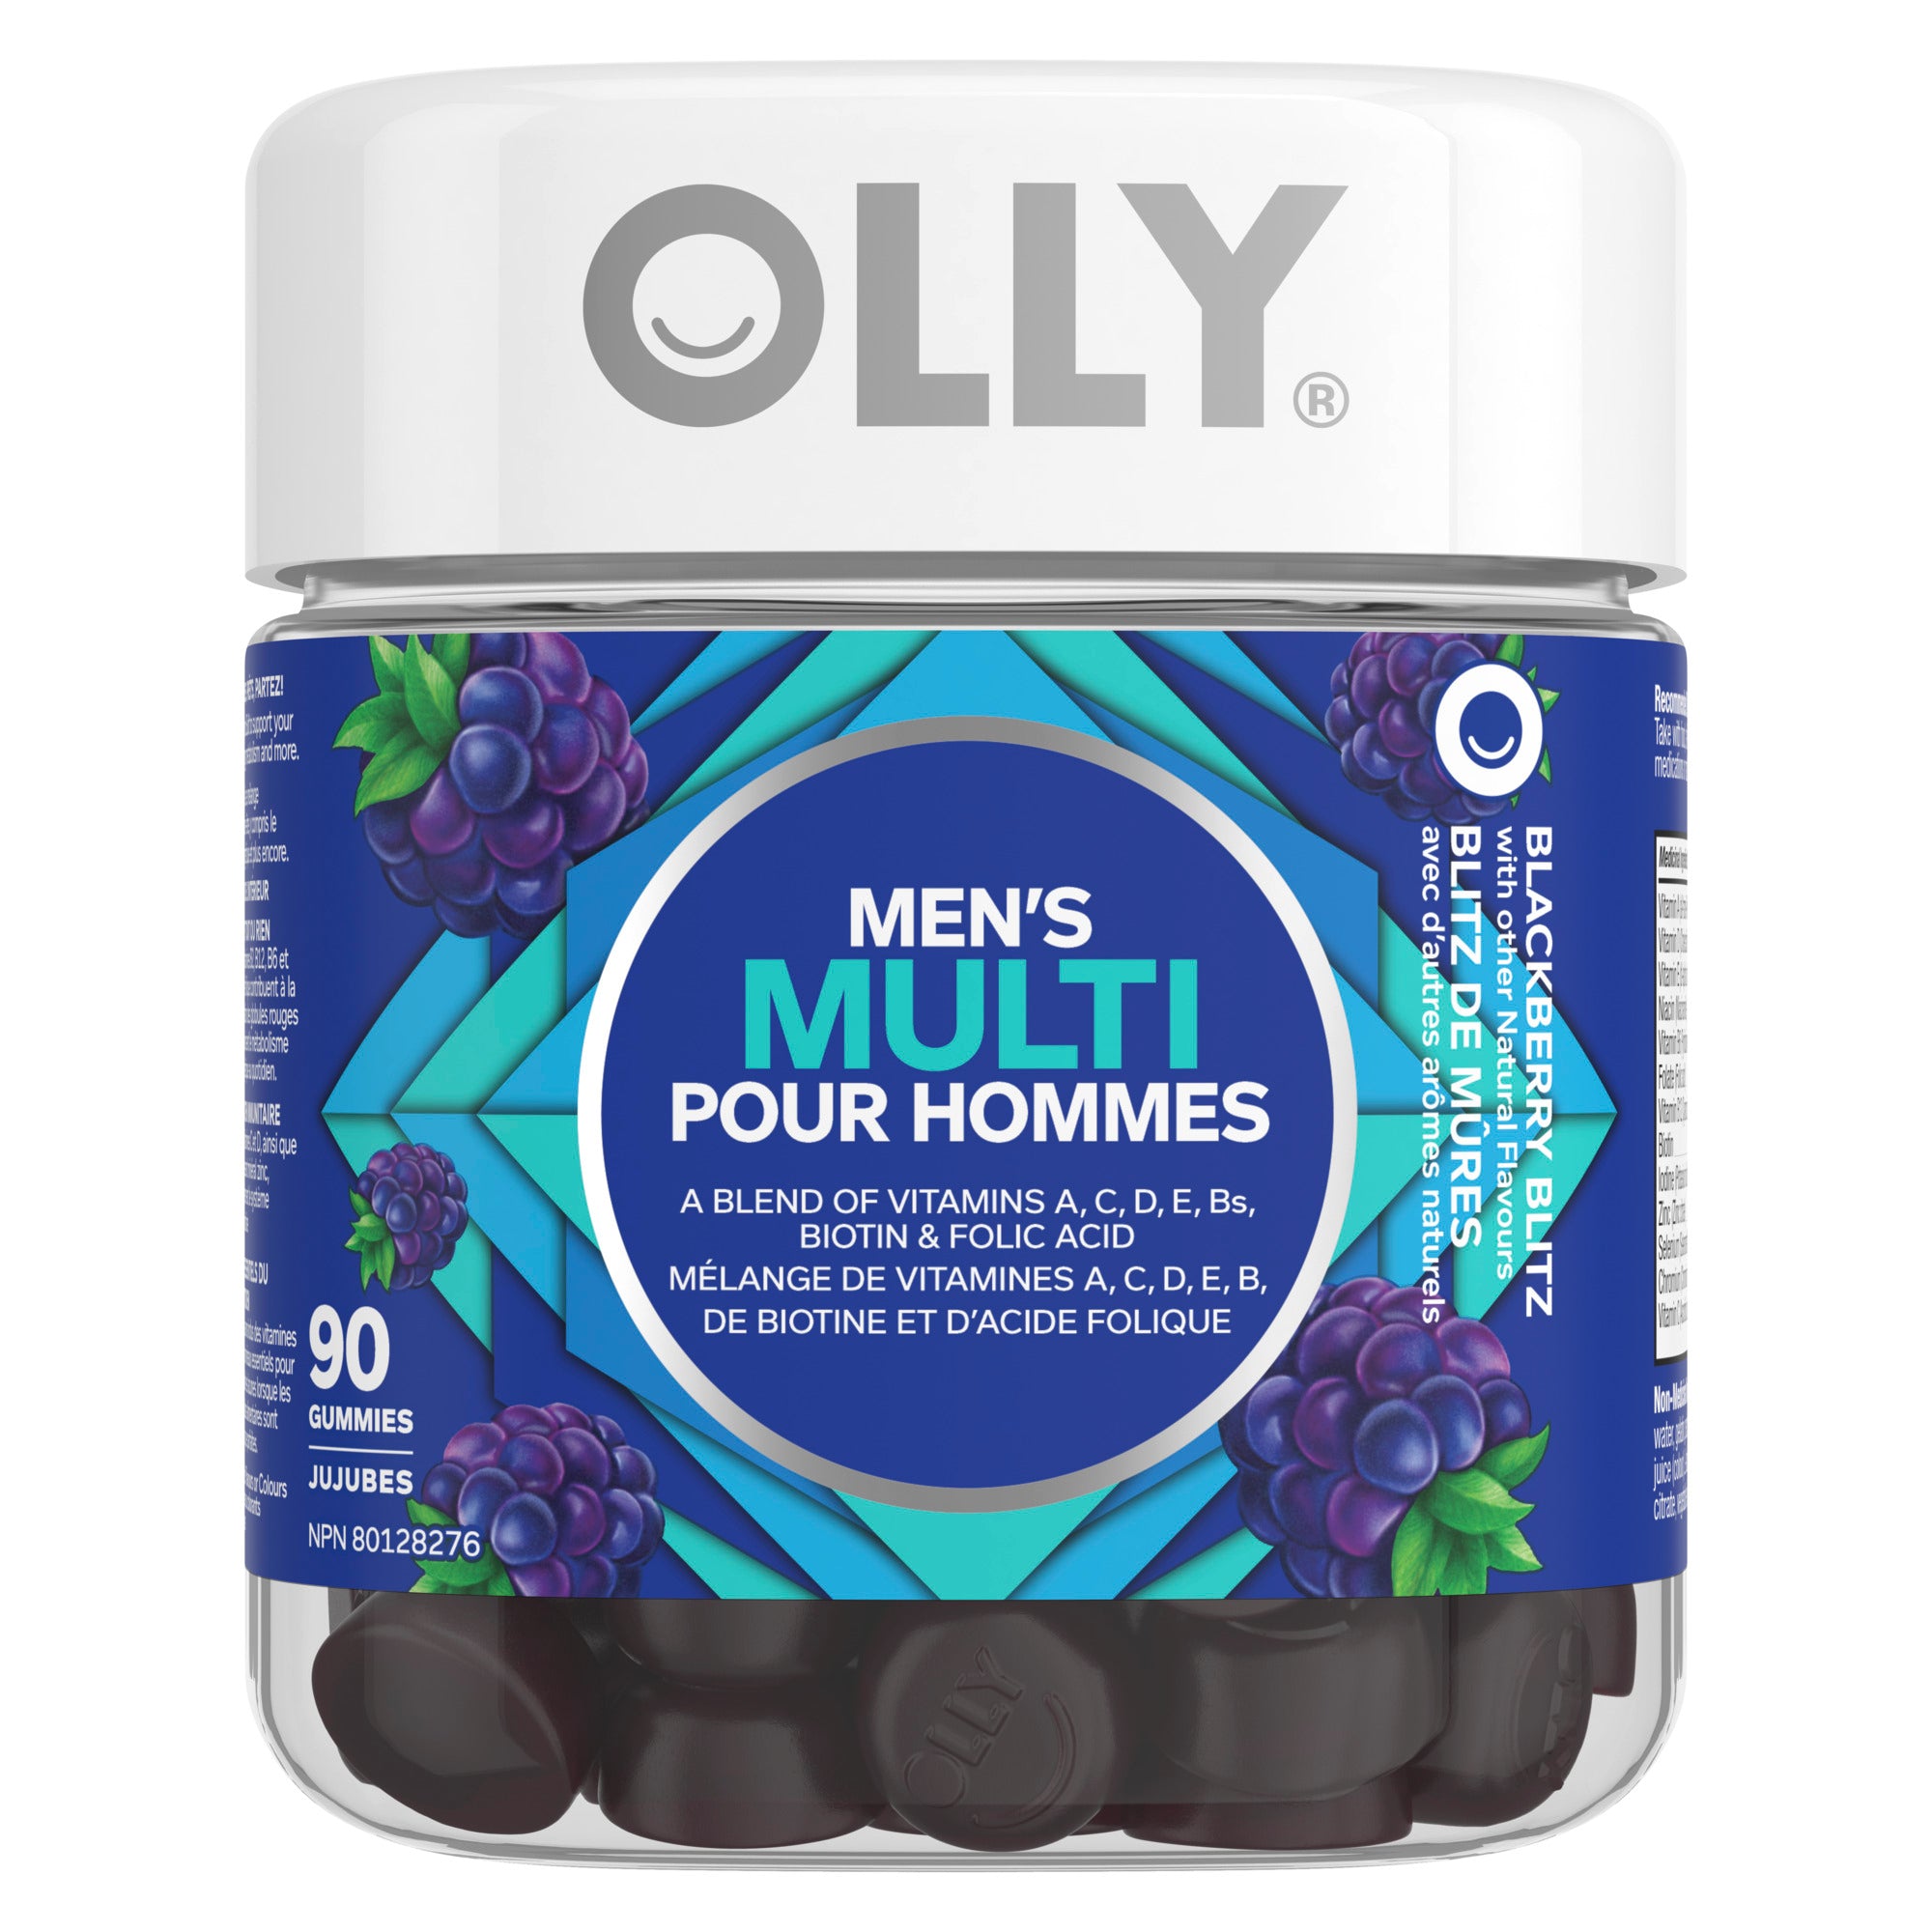 An image showing the frontside view of the OLLY® Men's Multi Vitamins product packaging.